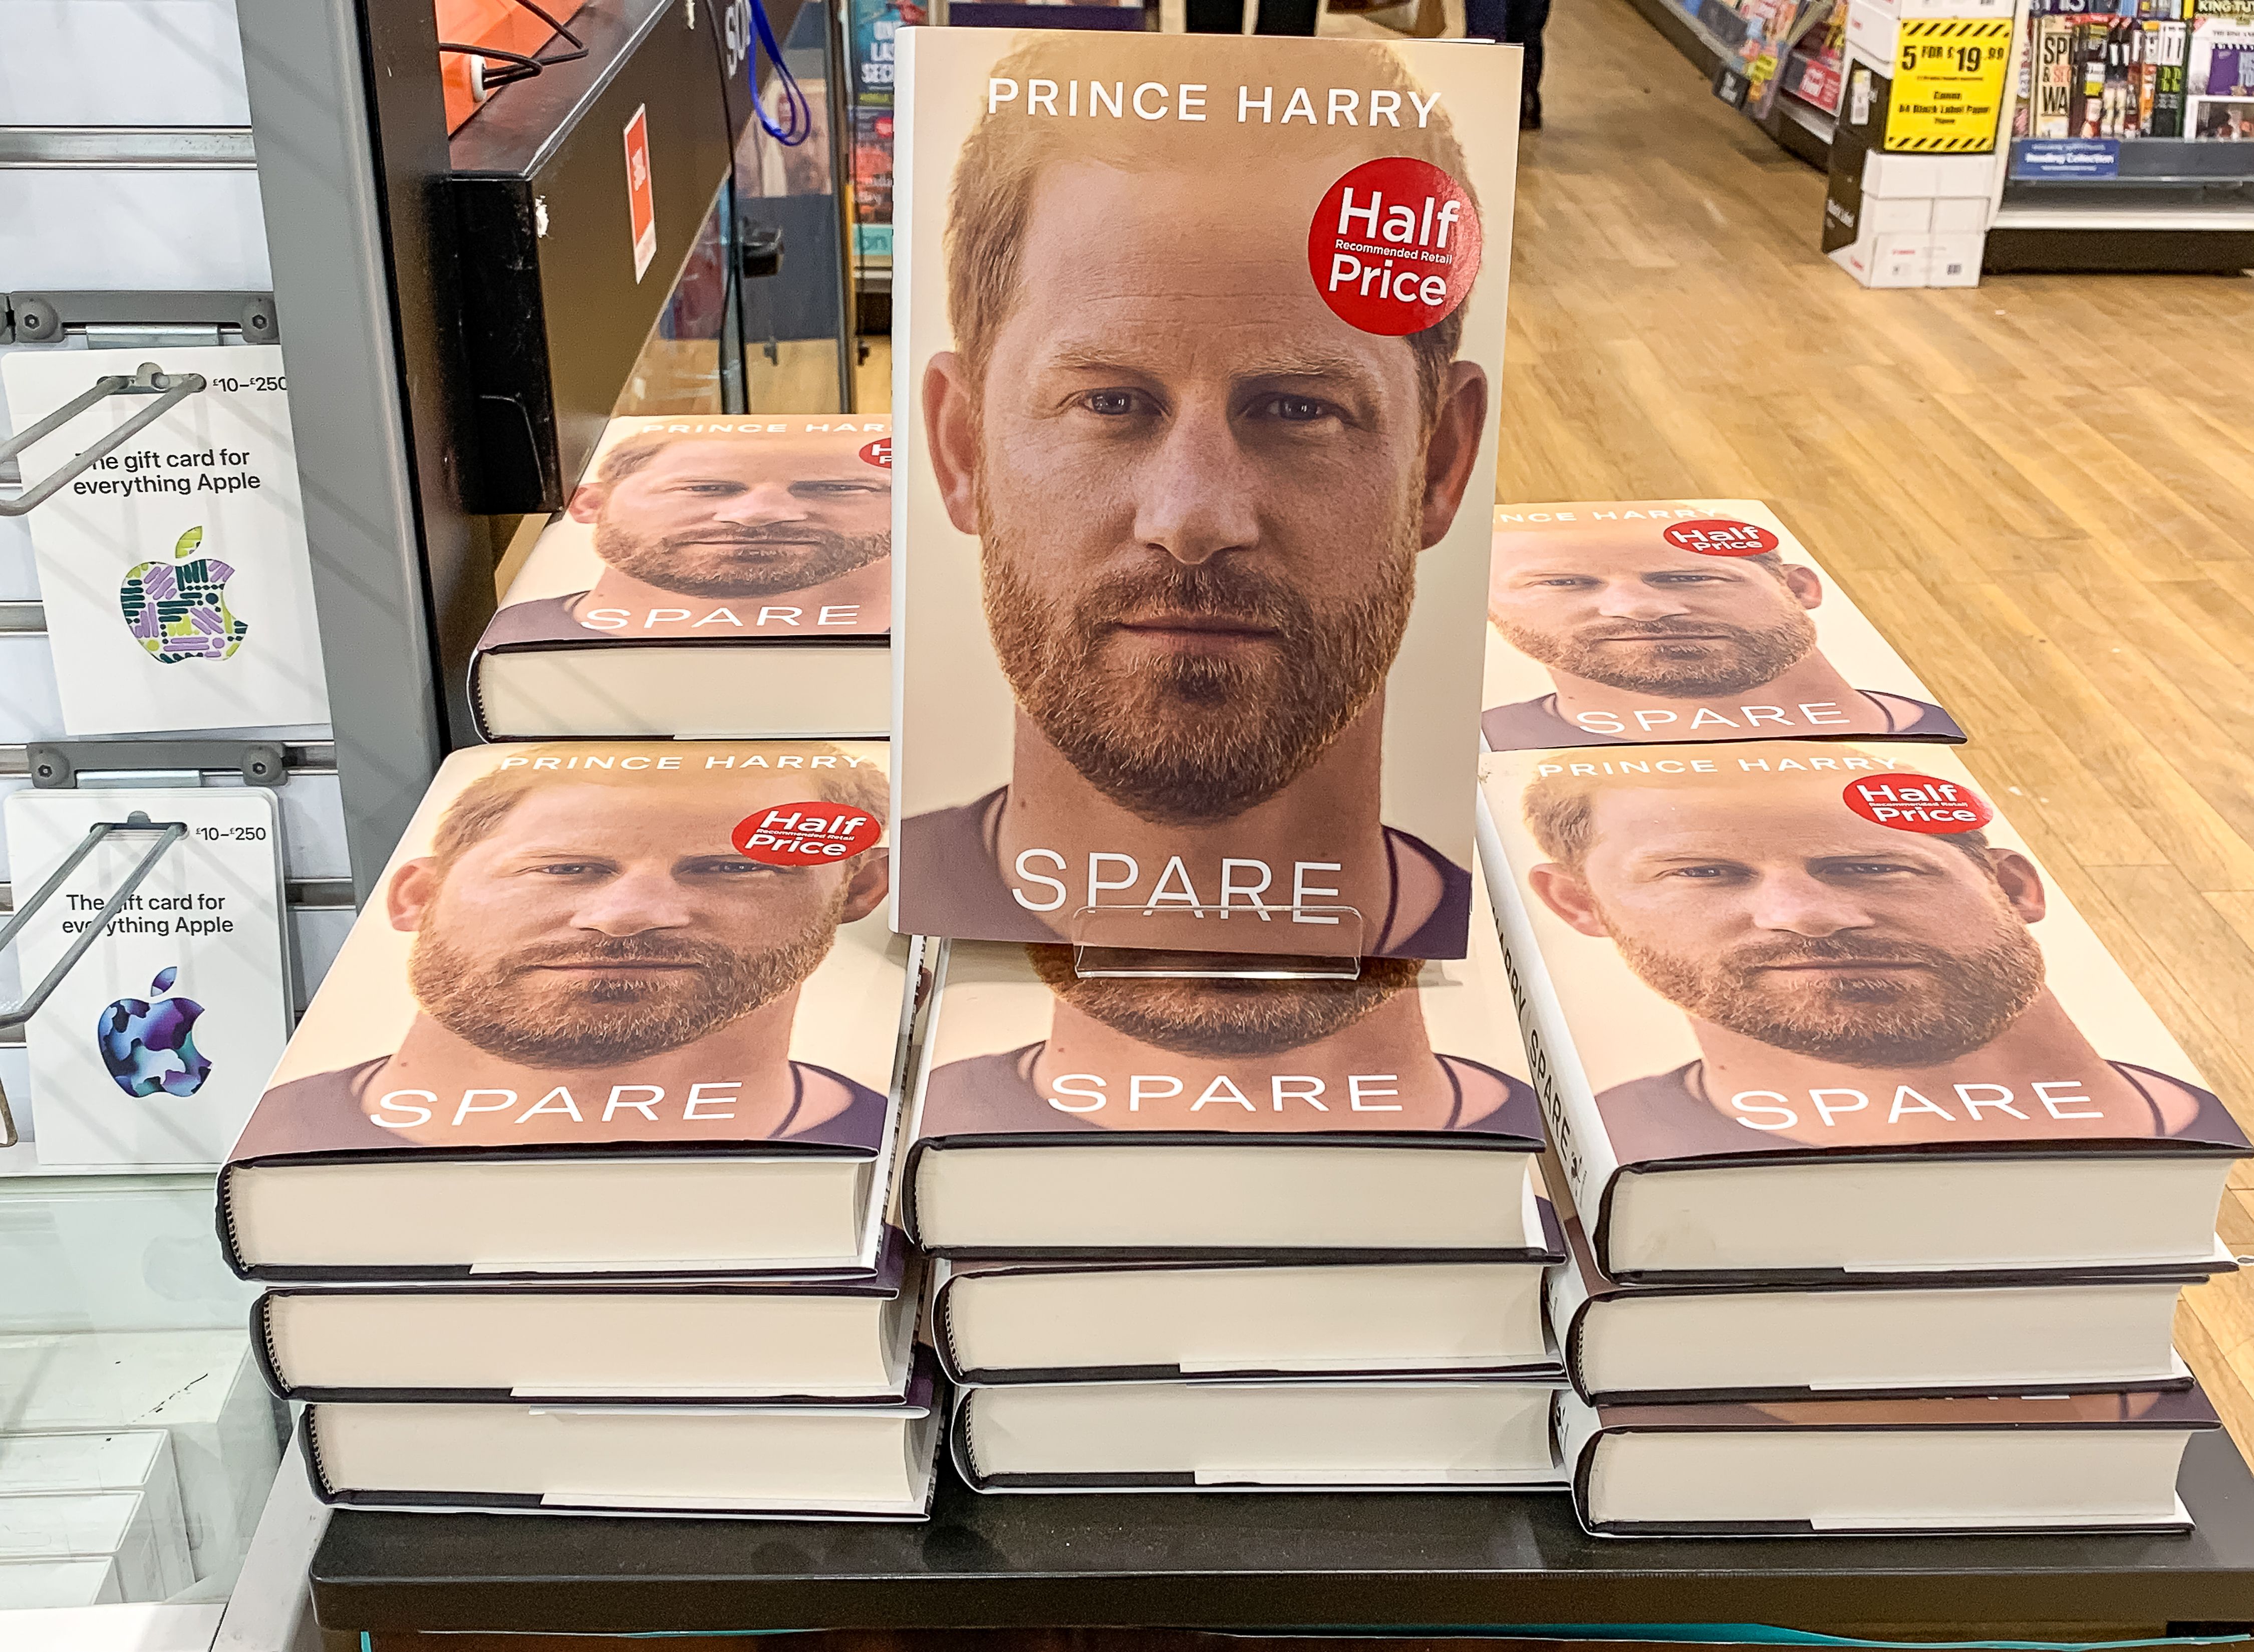 Prince Harry’s first tell-all memoir ‘Spare’ was released in January of last year.